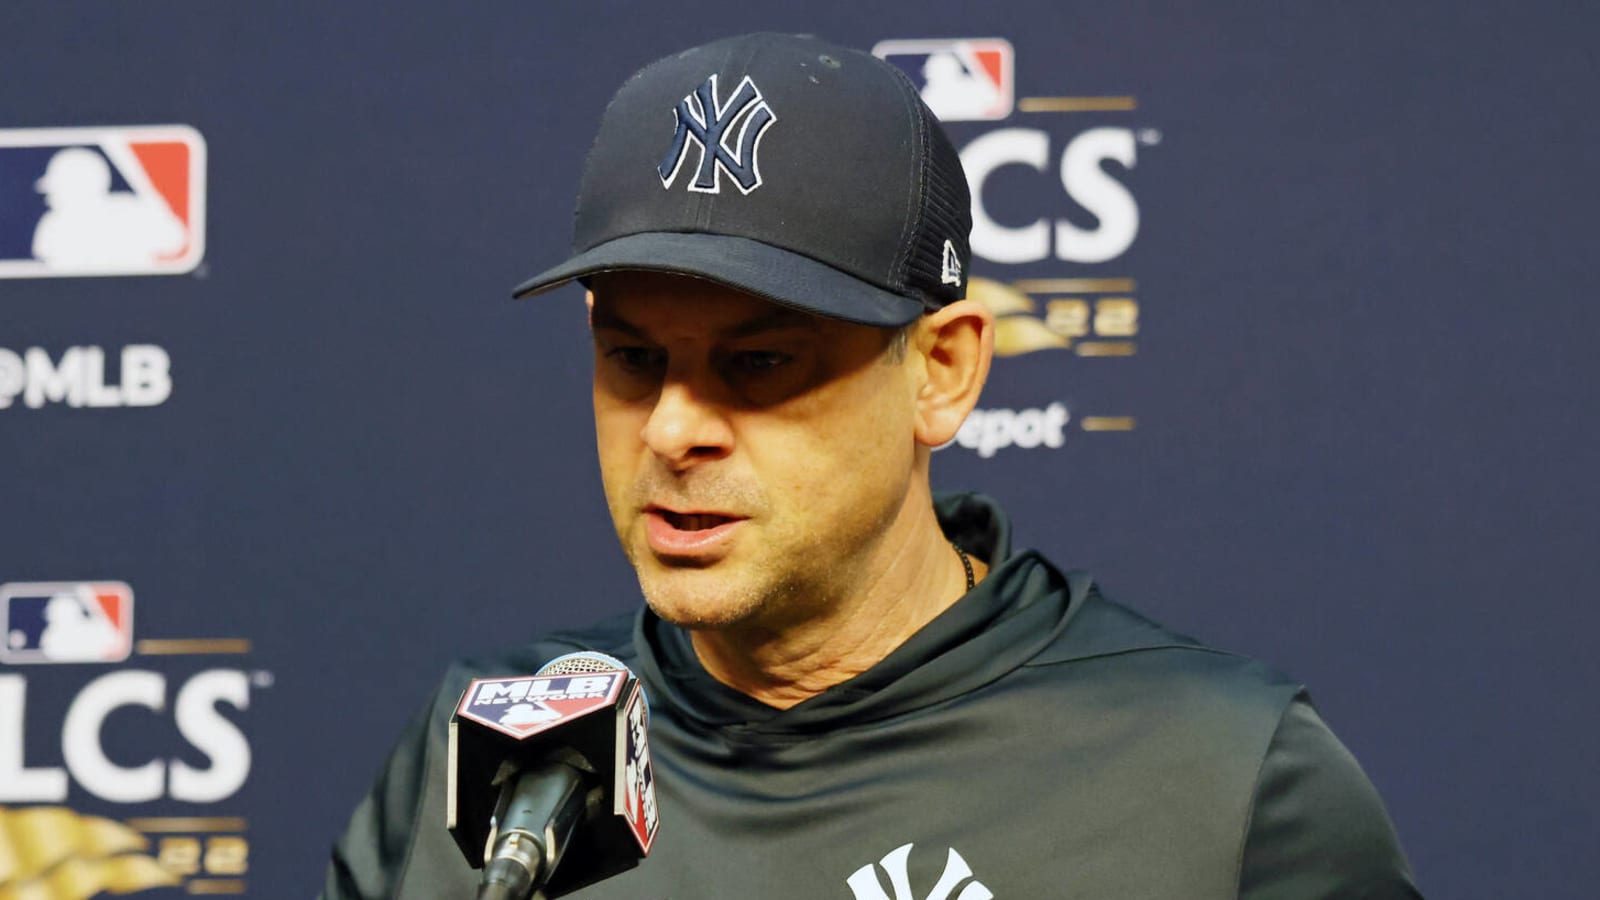 Yankees' Aaron Boone believes open roof played a role in Game 2 loss